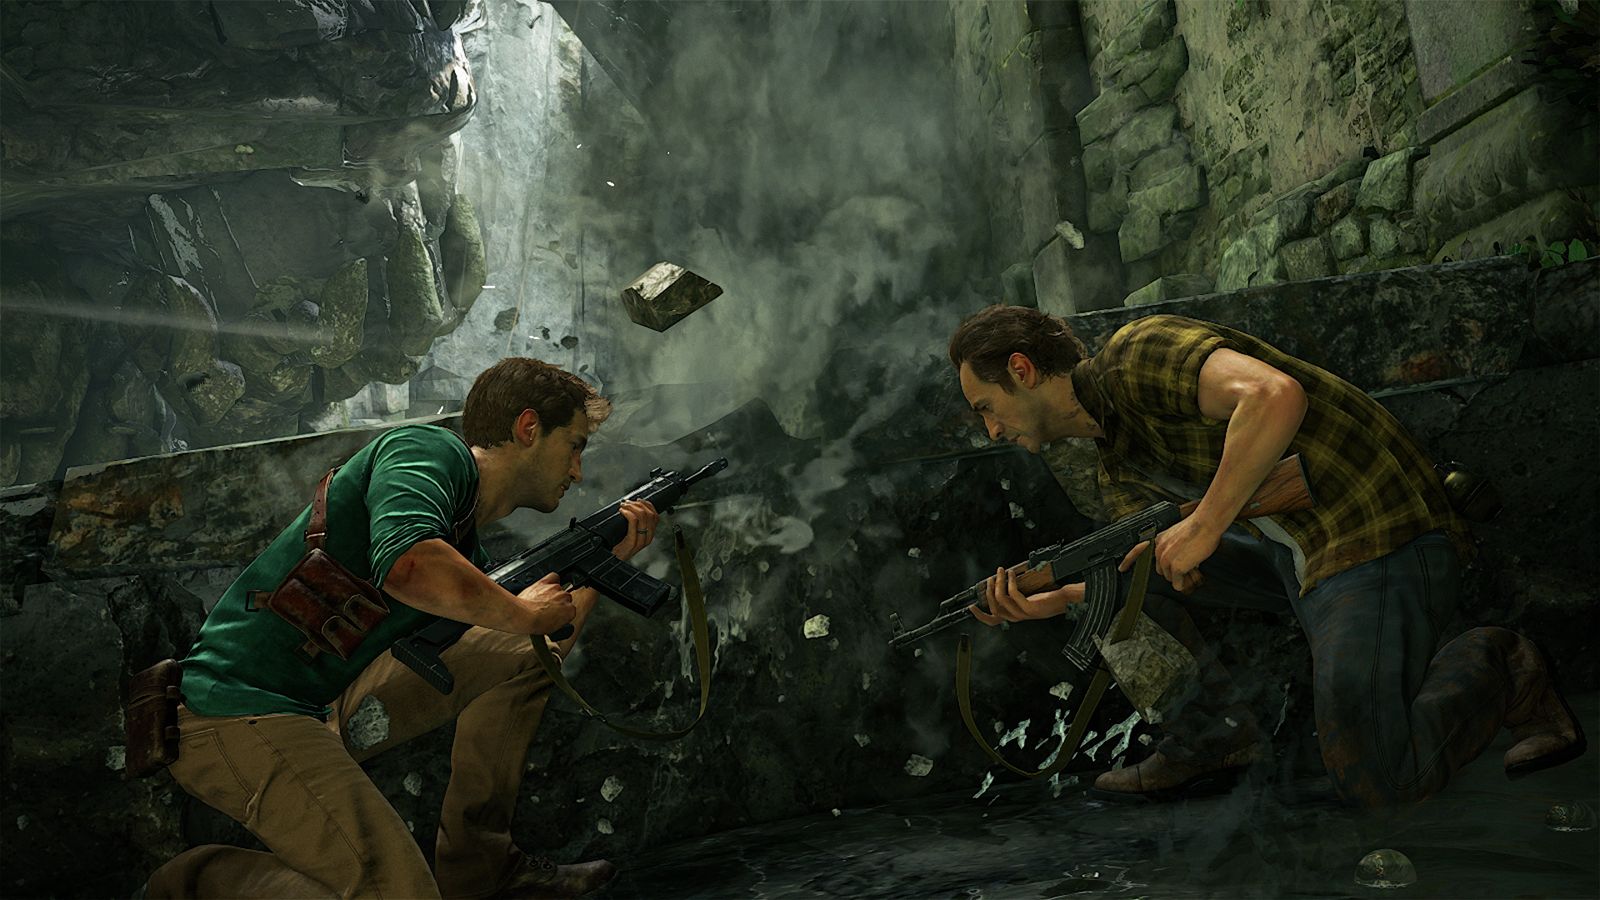 Uncharted 4' delayed to 2016